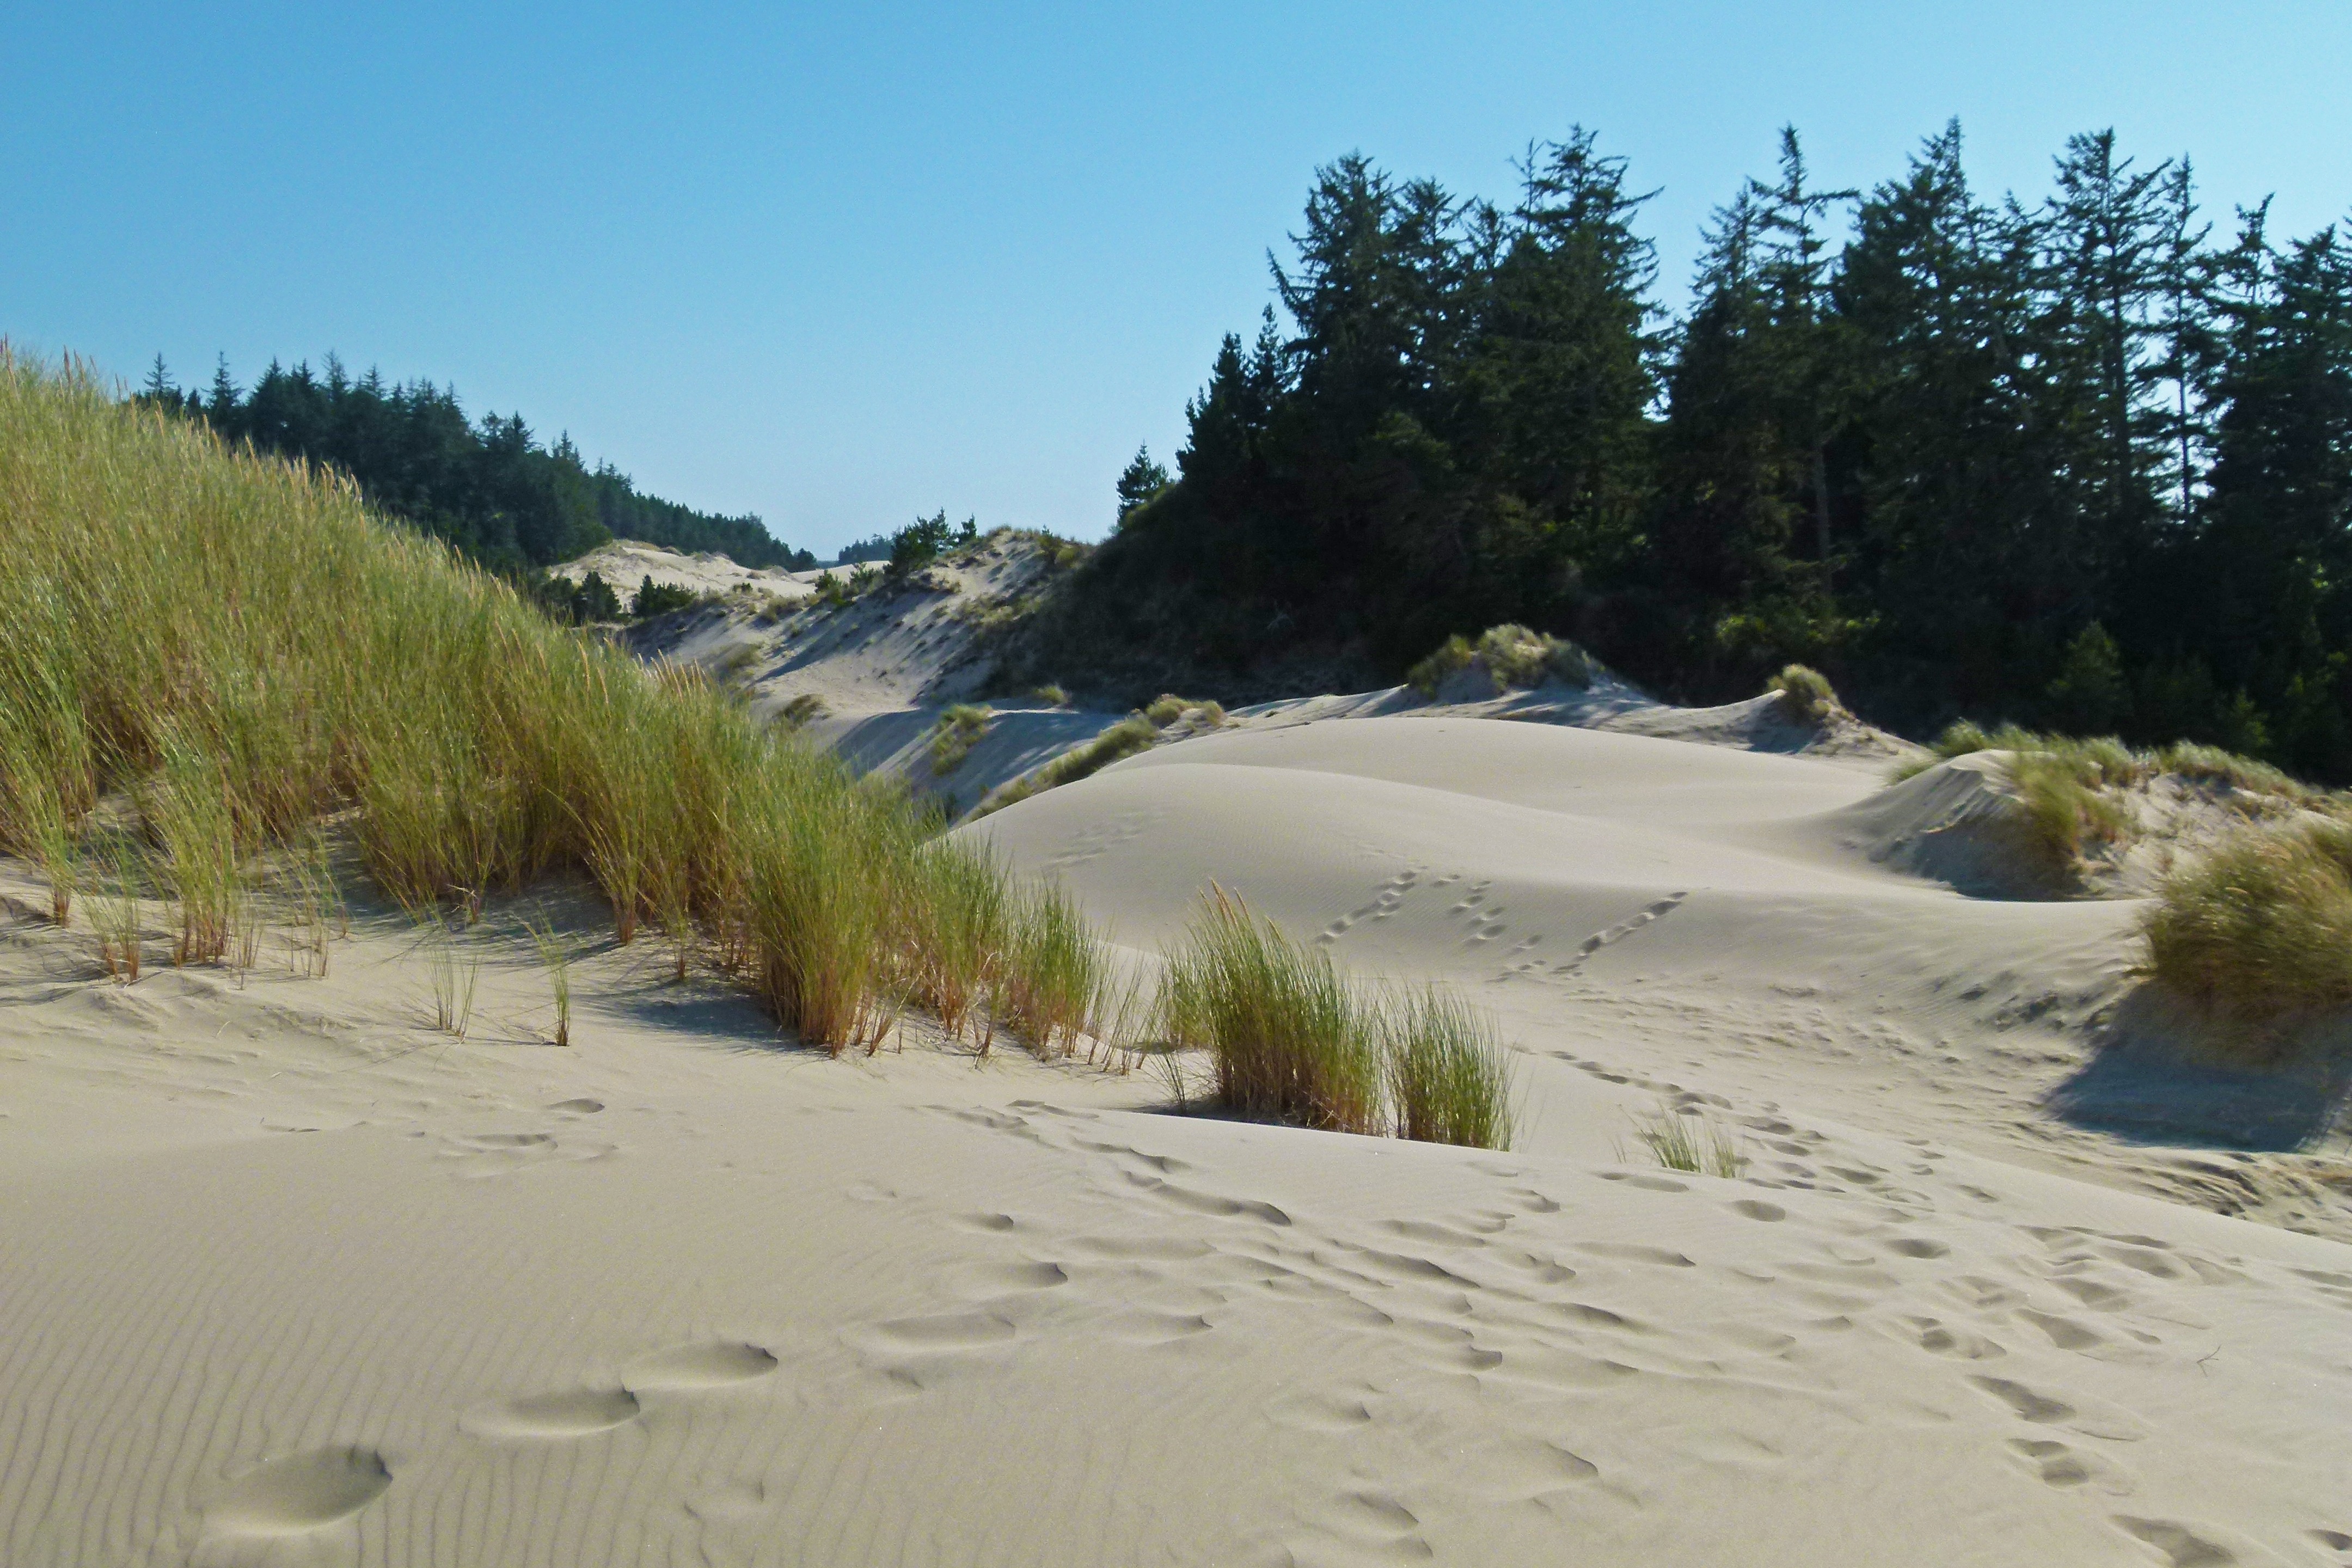 OR Sand Dunes